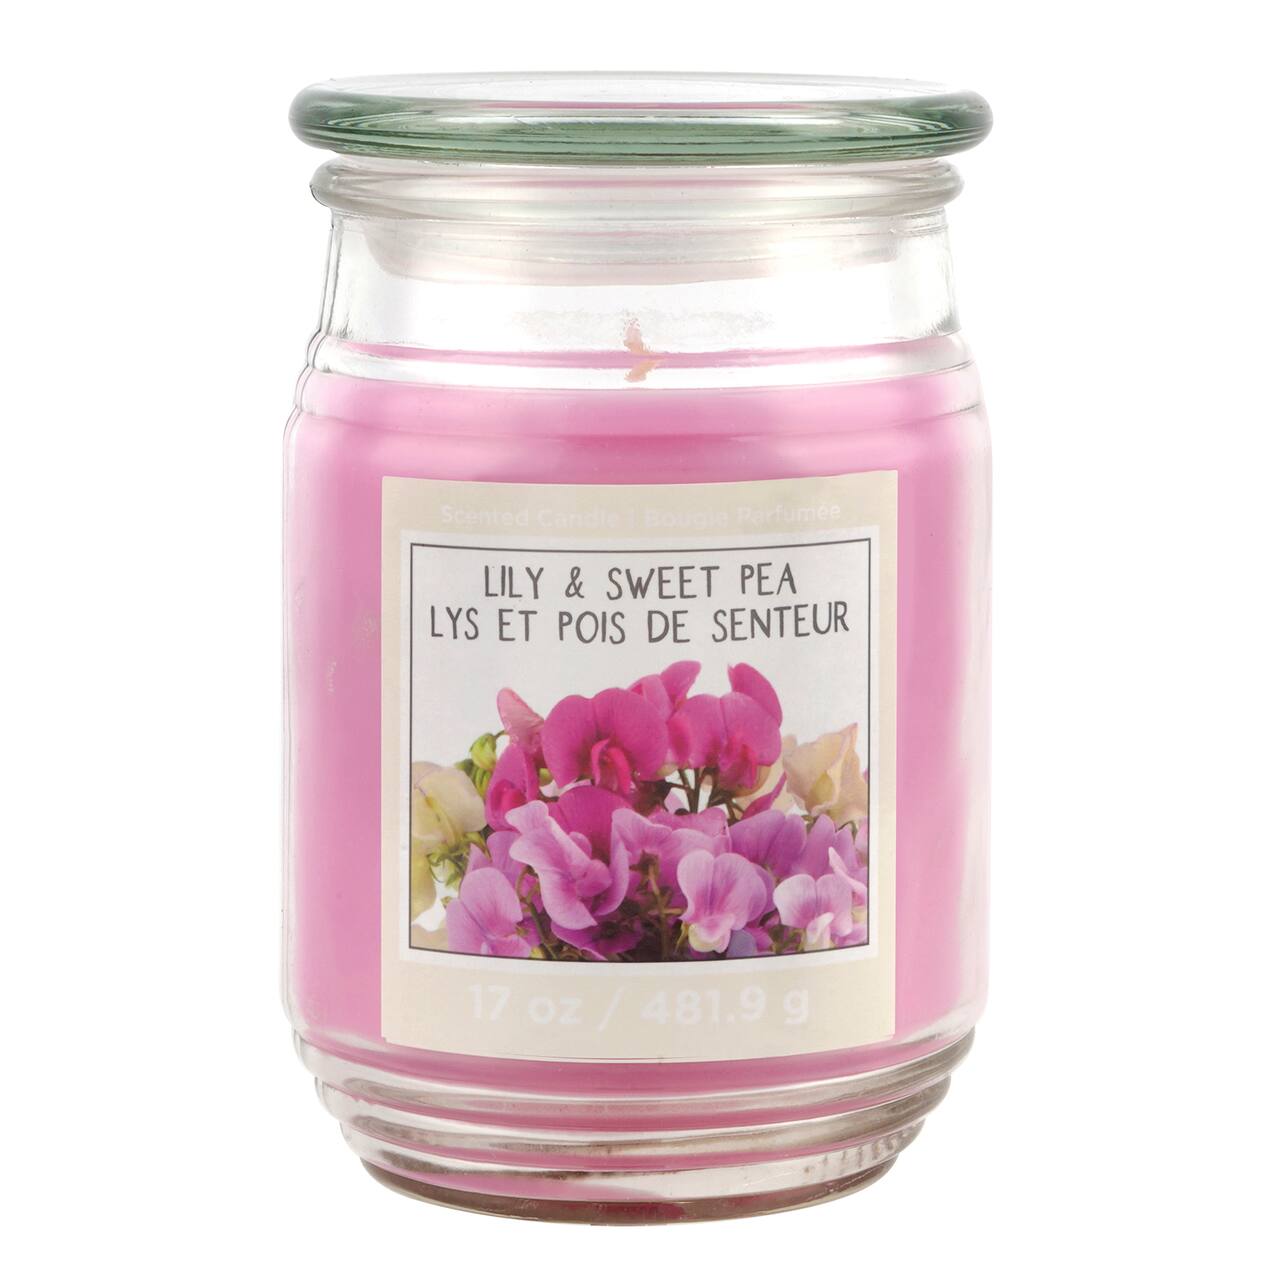 Lily &#x26; Sweet Pea Scented Jar Candle by Ashland&#xAE;